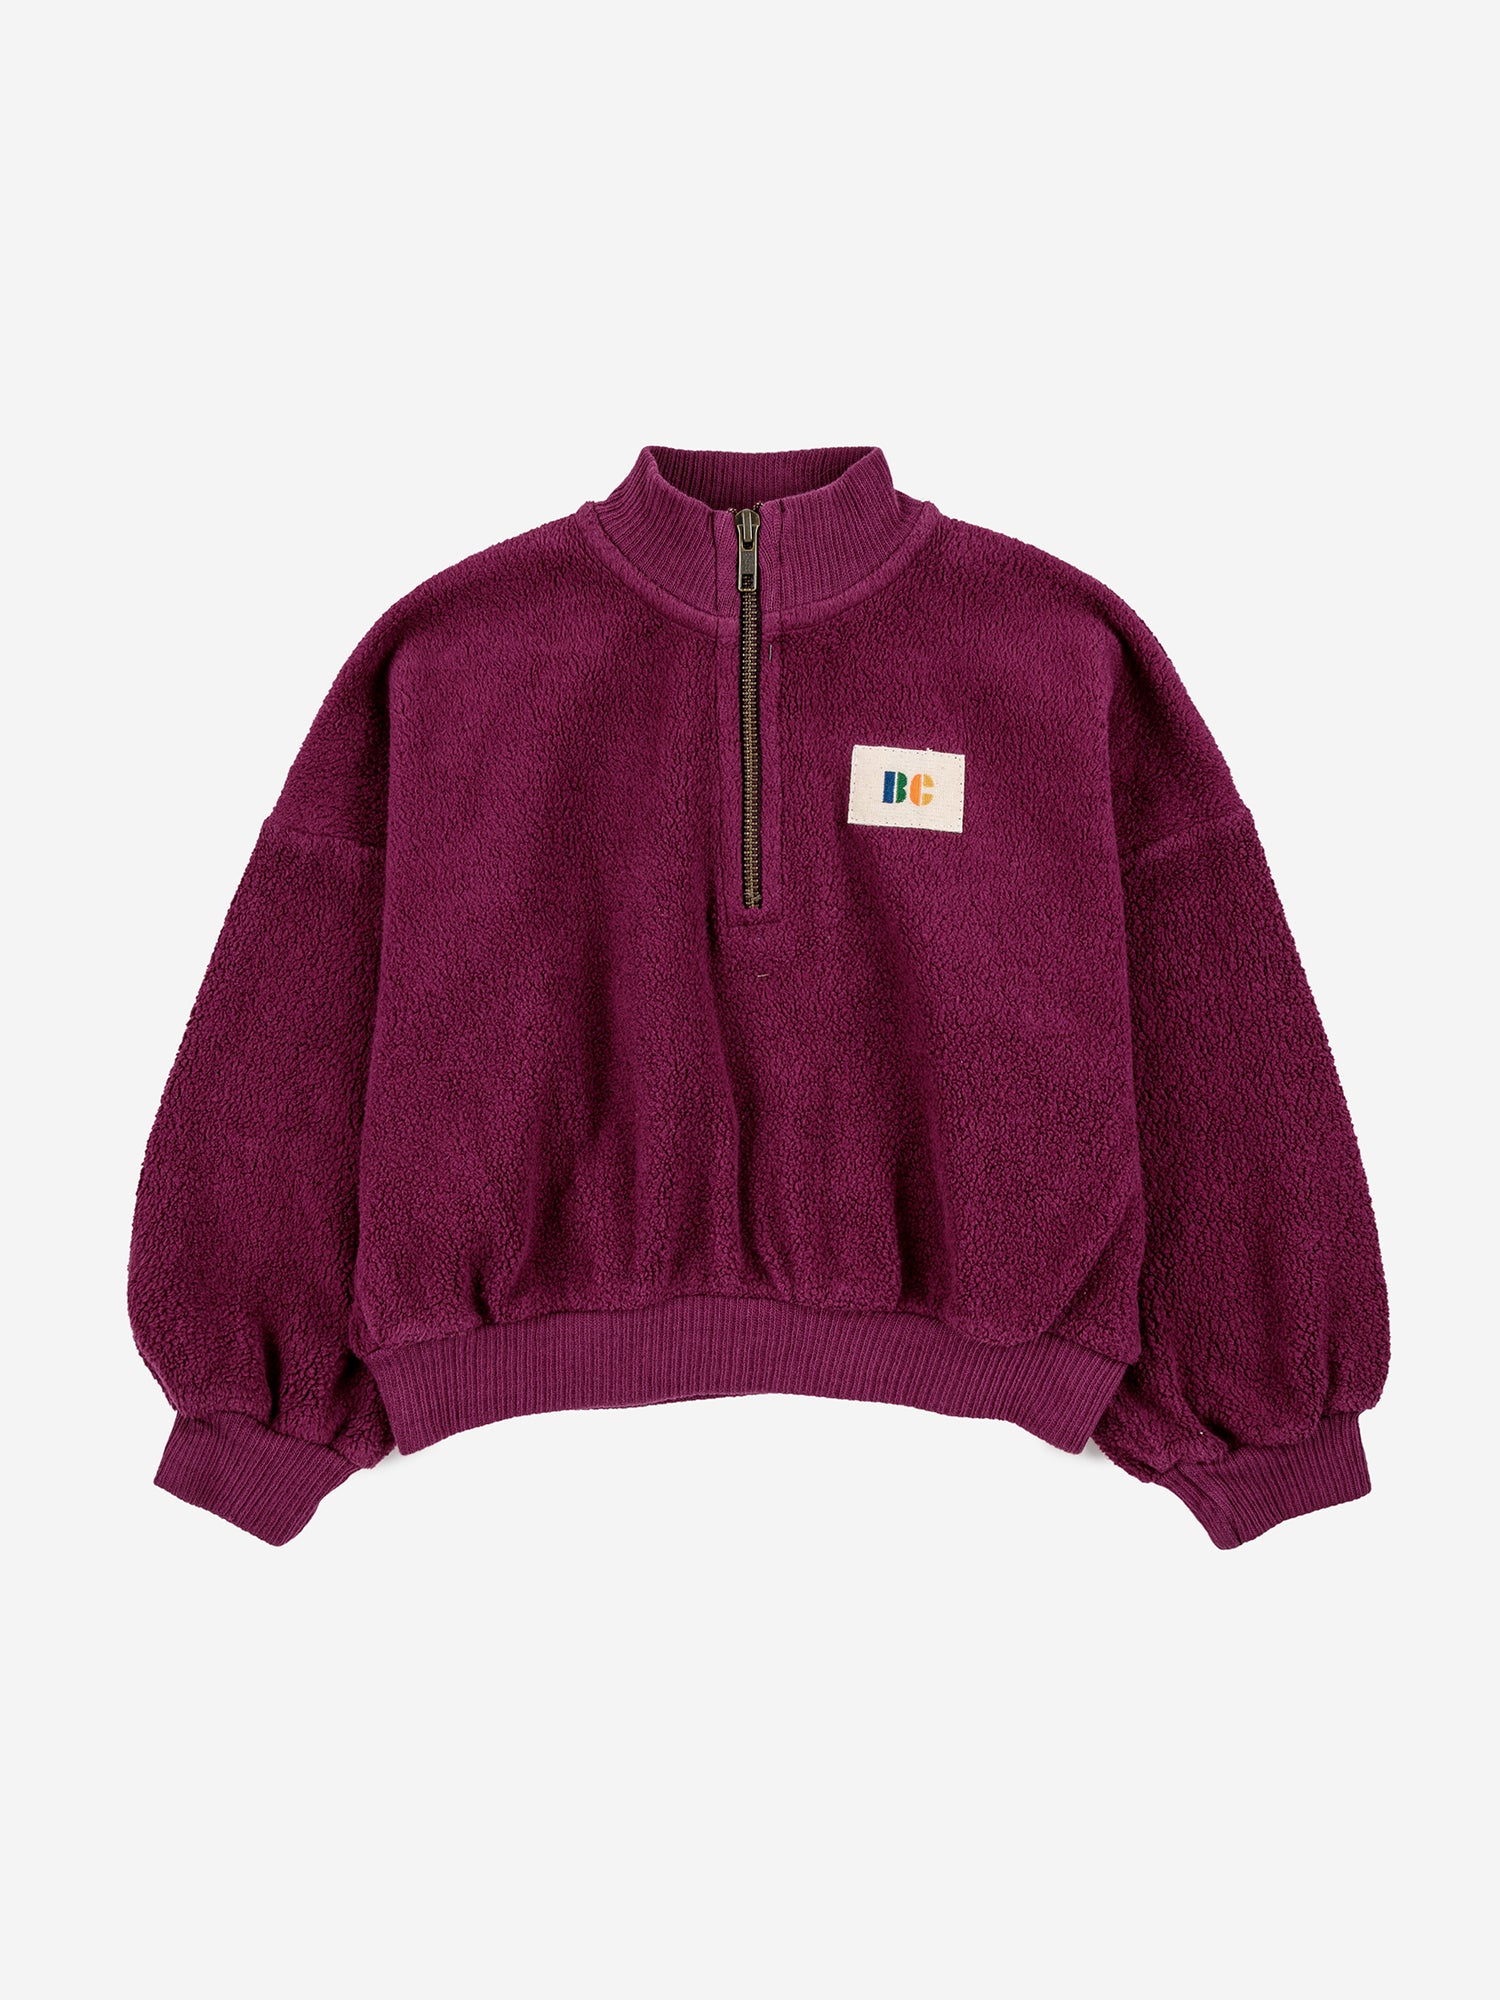 B.C. Label Sweatshirt by Bobo Choses. 100% organic cotton purple fleece sweatshirt. Designed with balloon sleeves, dropped shoulder, ribbed mock neck & hems, and a half zipper. It has a loose fit.  Made ethically and sustainably in Portugal for Bobo Choses.